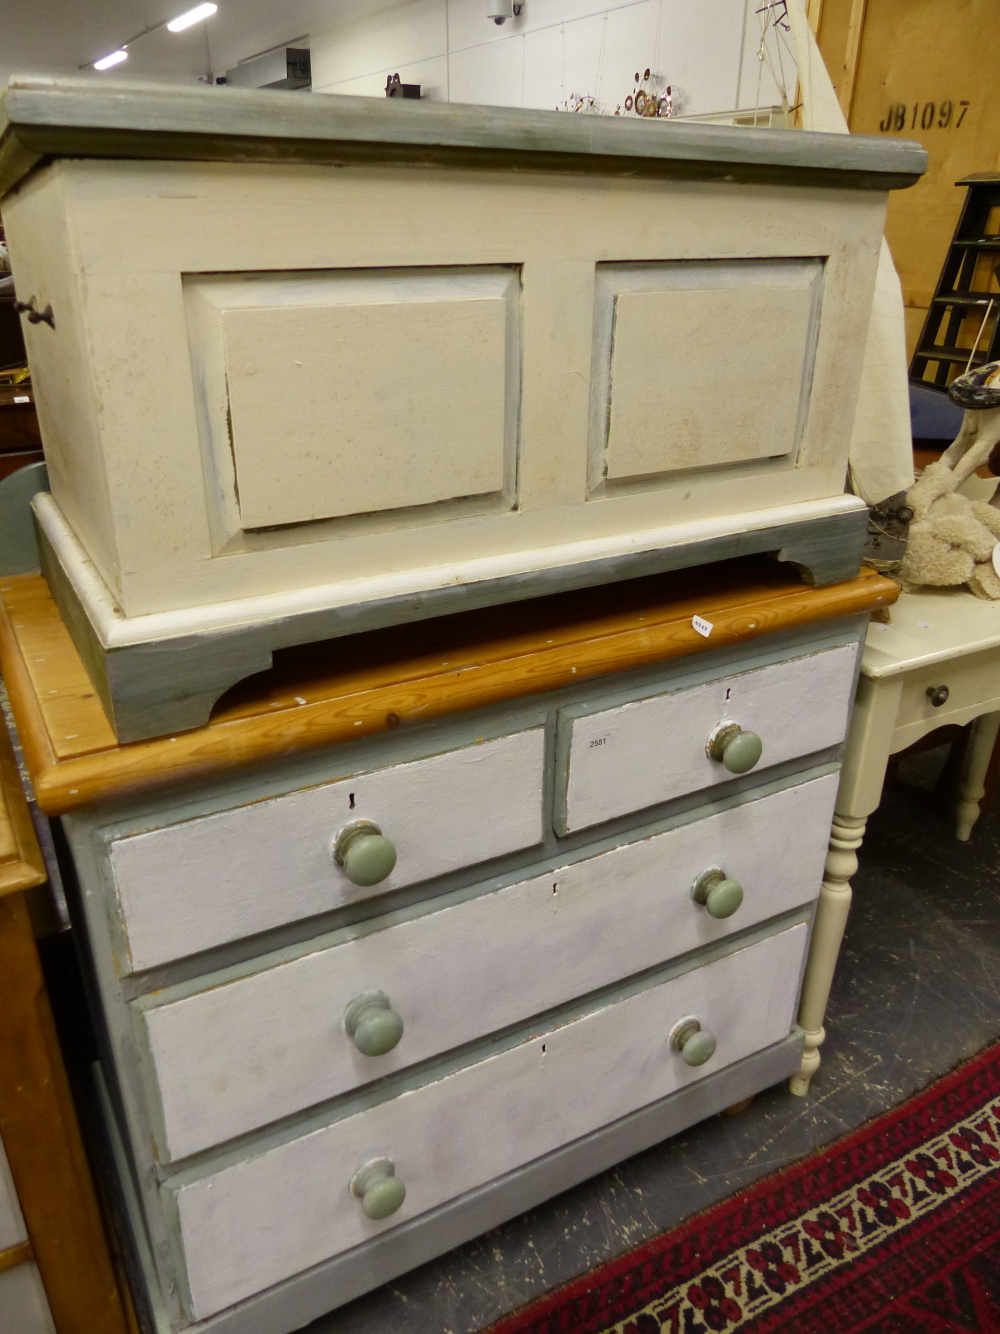 AN ANTIQUE PAINTED PINE CHEST OF DRAWERS, A PINE OTTOMAN, AND A SIDE TABLE...